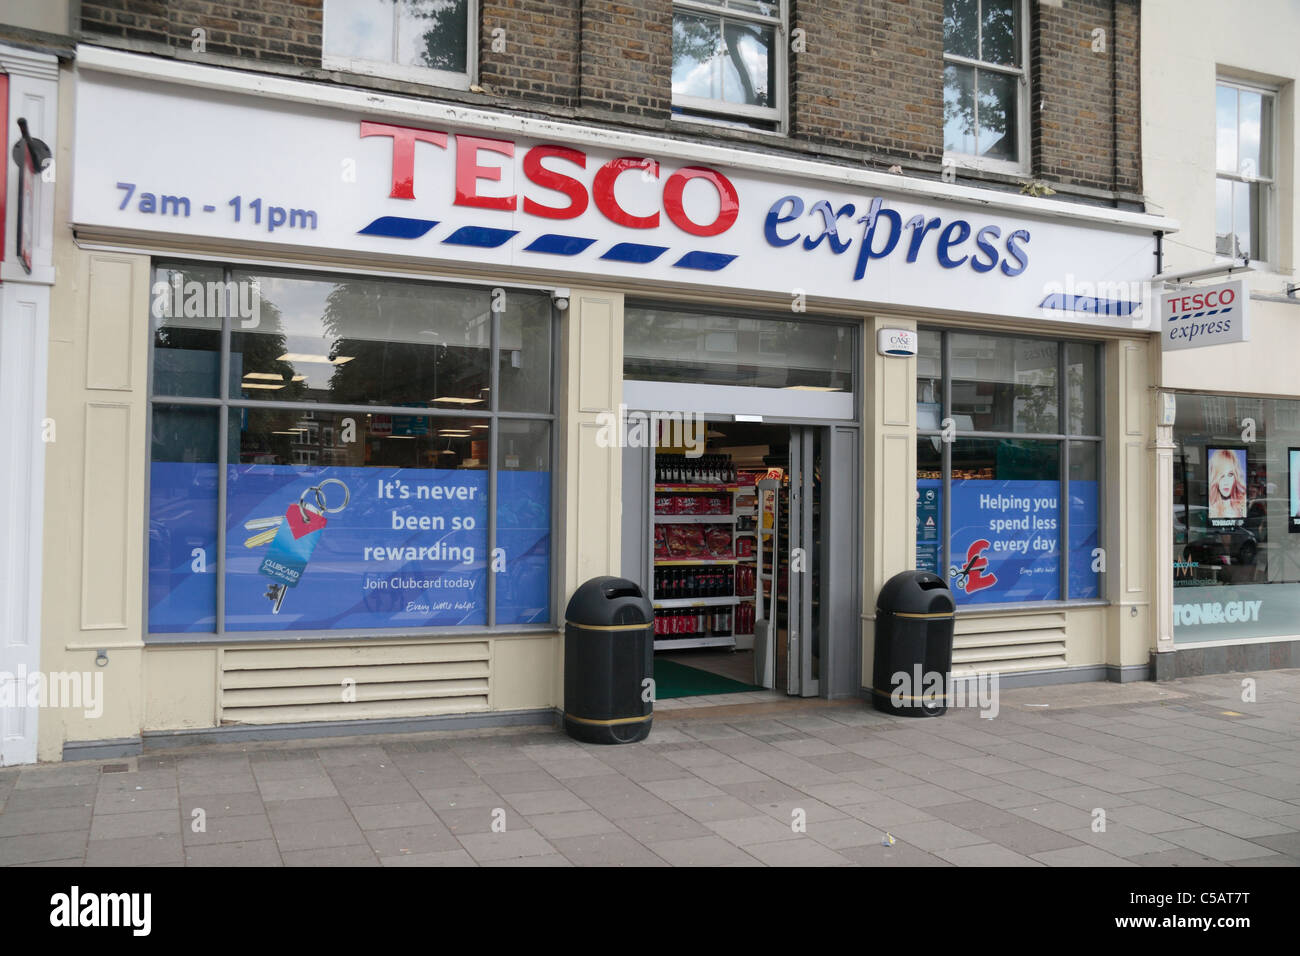 The entrance to the Tesco Express shop on Chiswick High Road, West London, England. Stock Photo